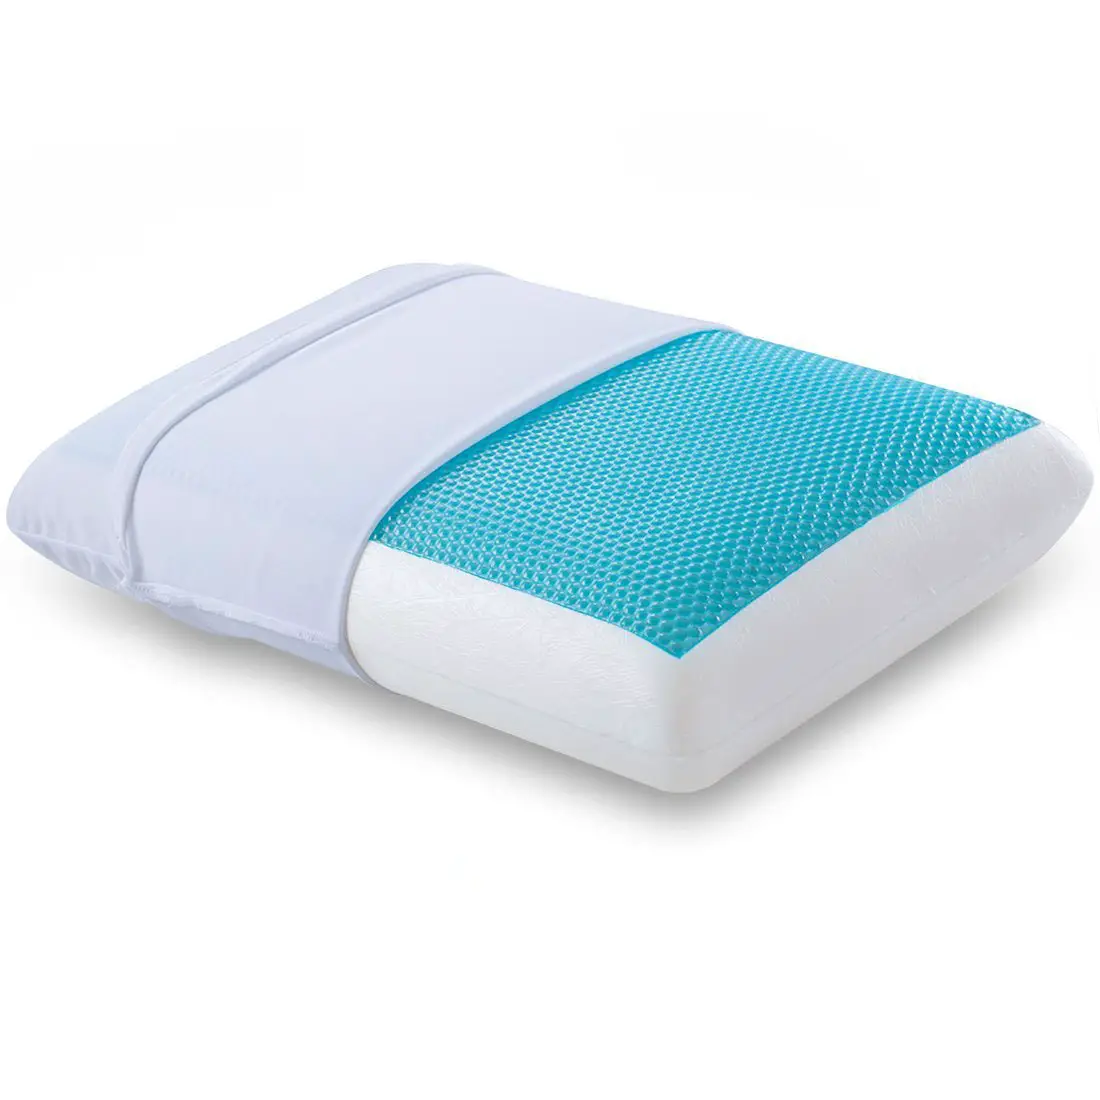 12 Best Memory Foam Pillows With Cooling Gel  Page 1065  Reviews ...